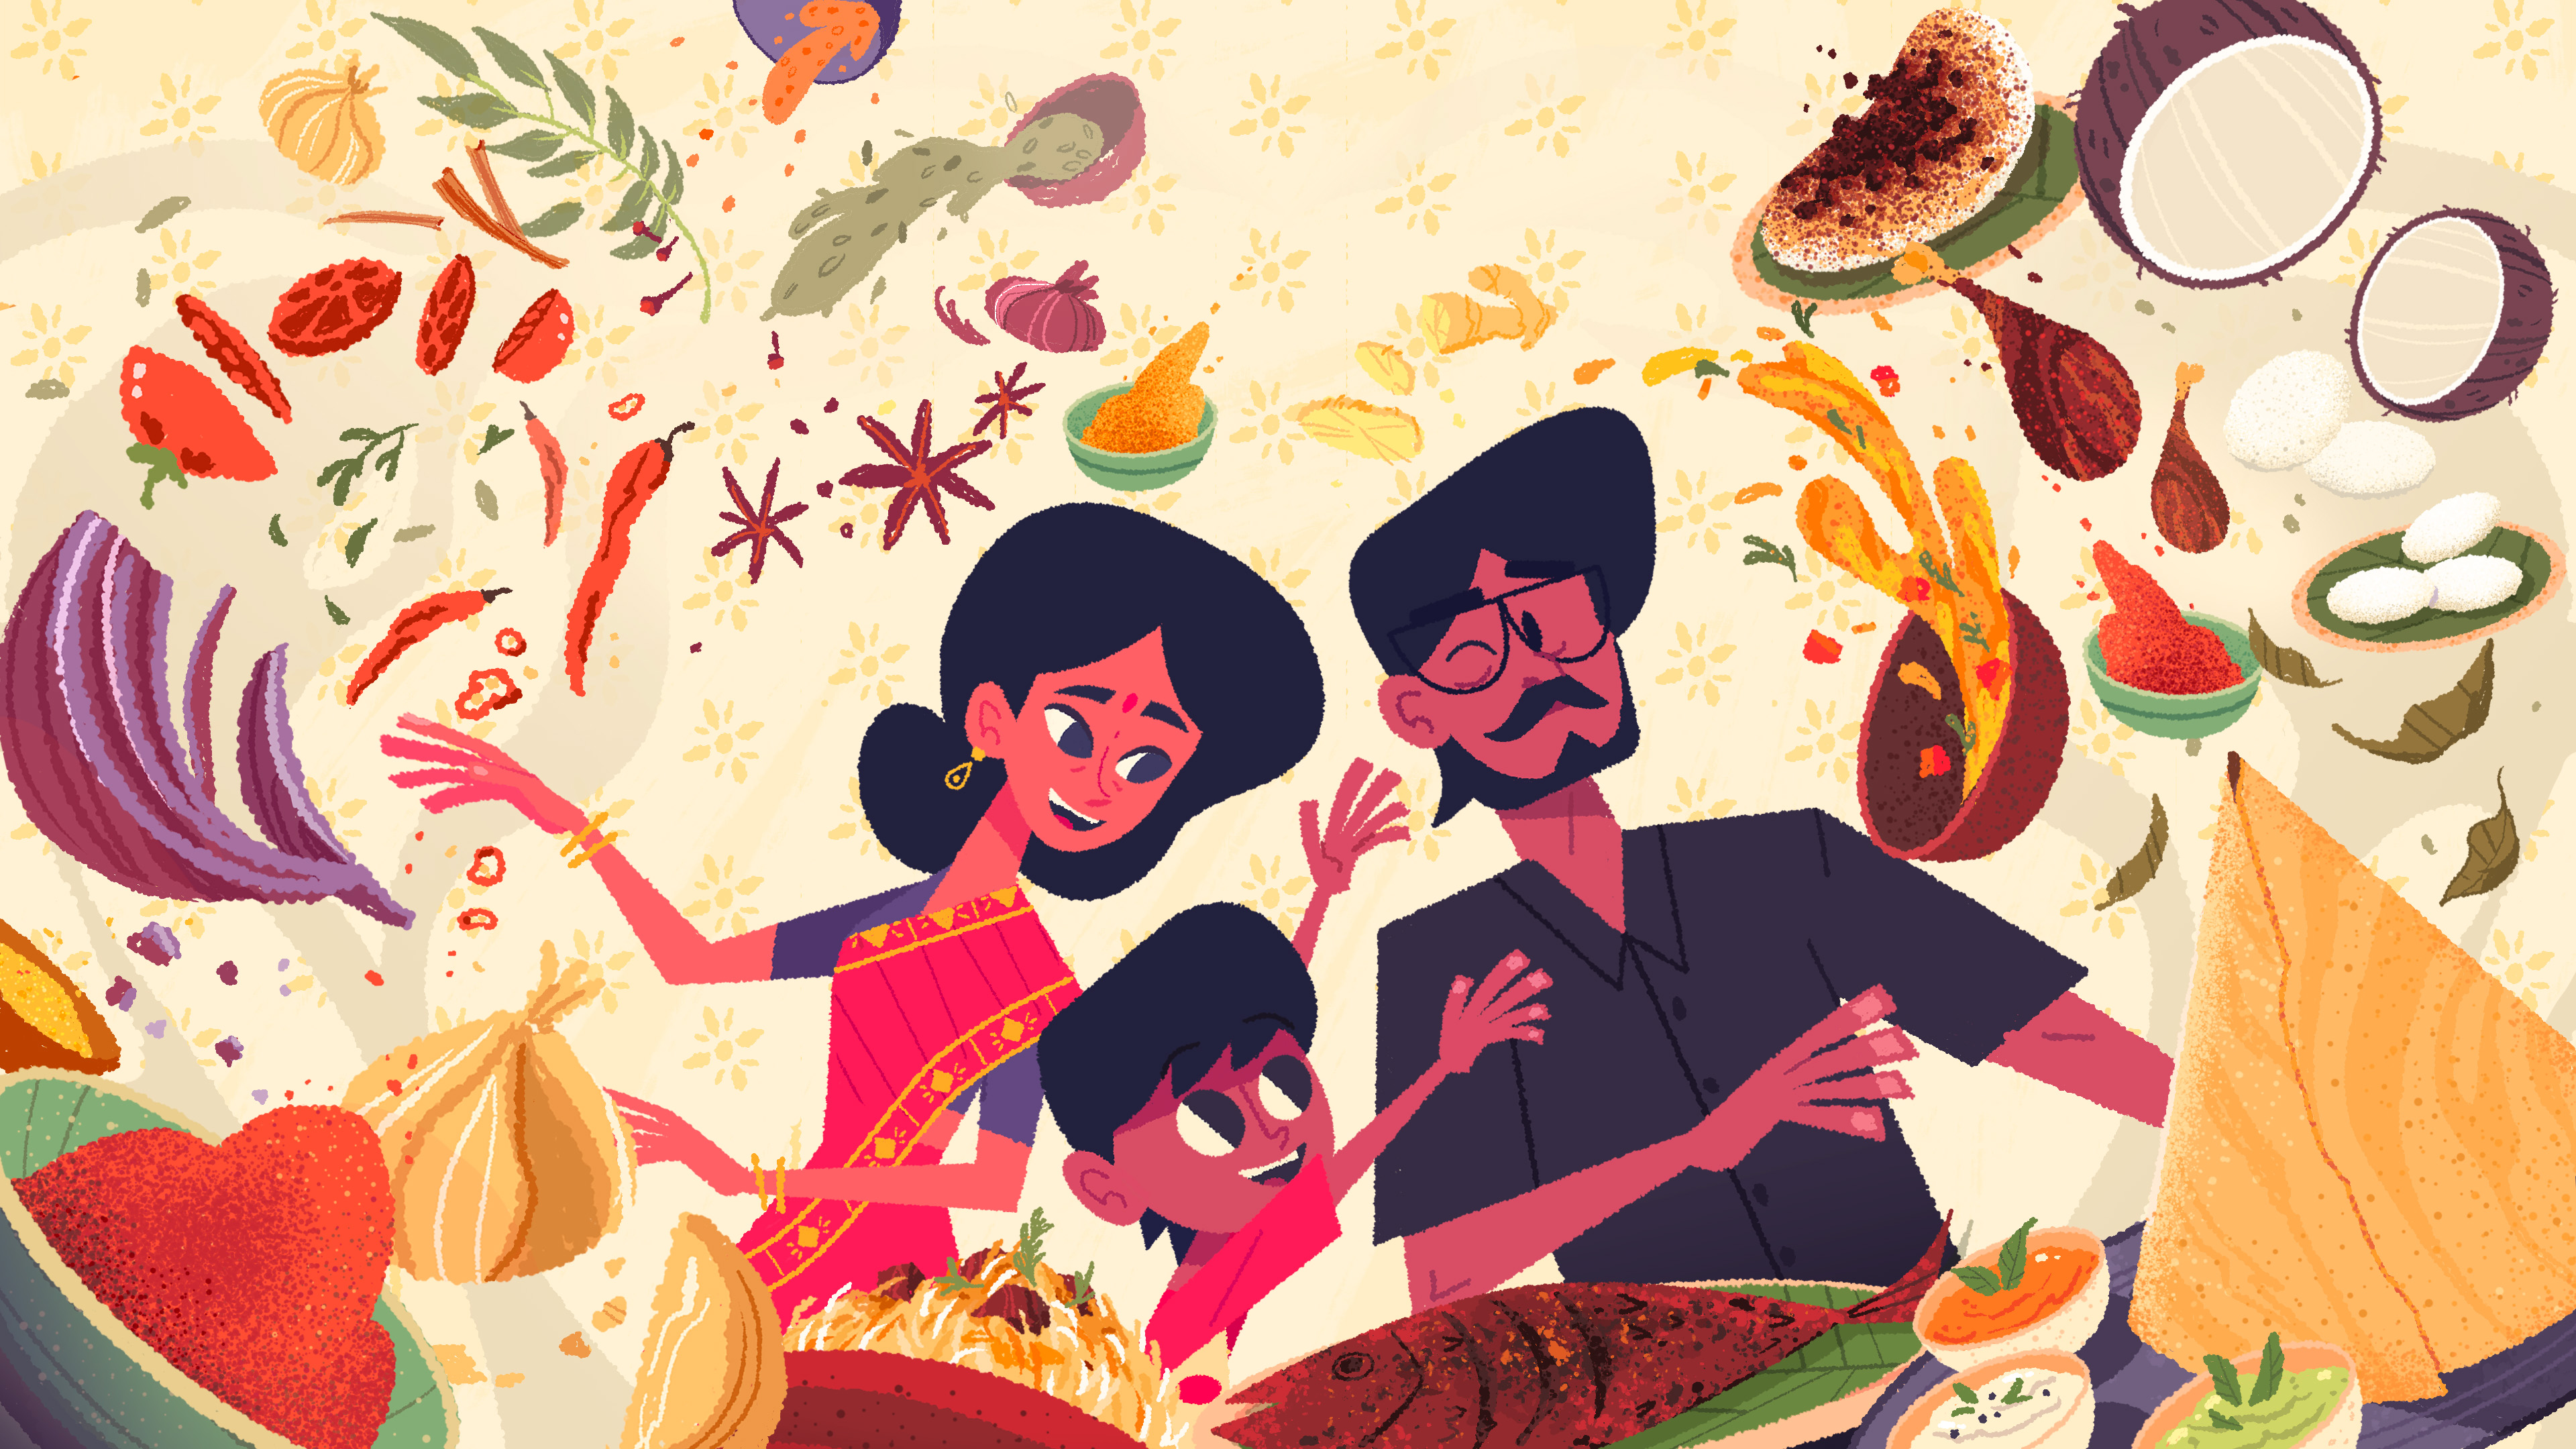 An image from Venba game. The main characters are in the middle as food elements explode around them.